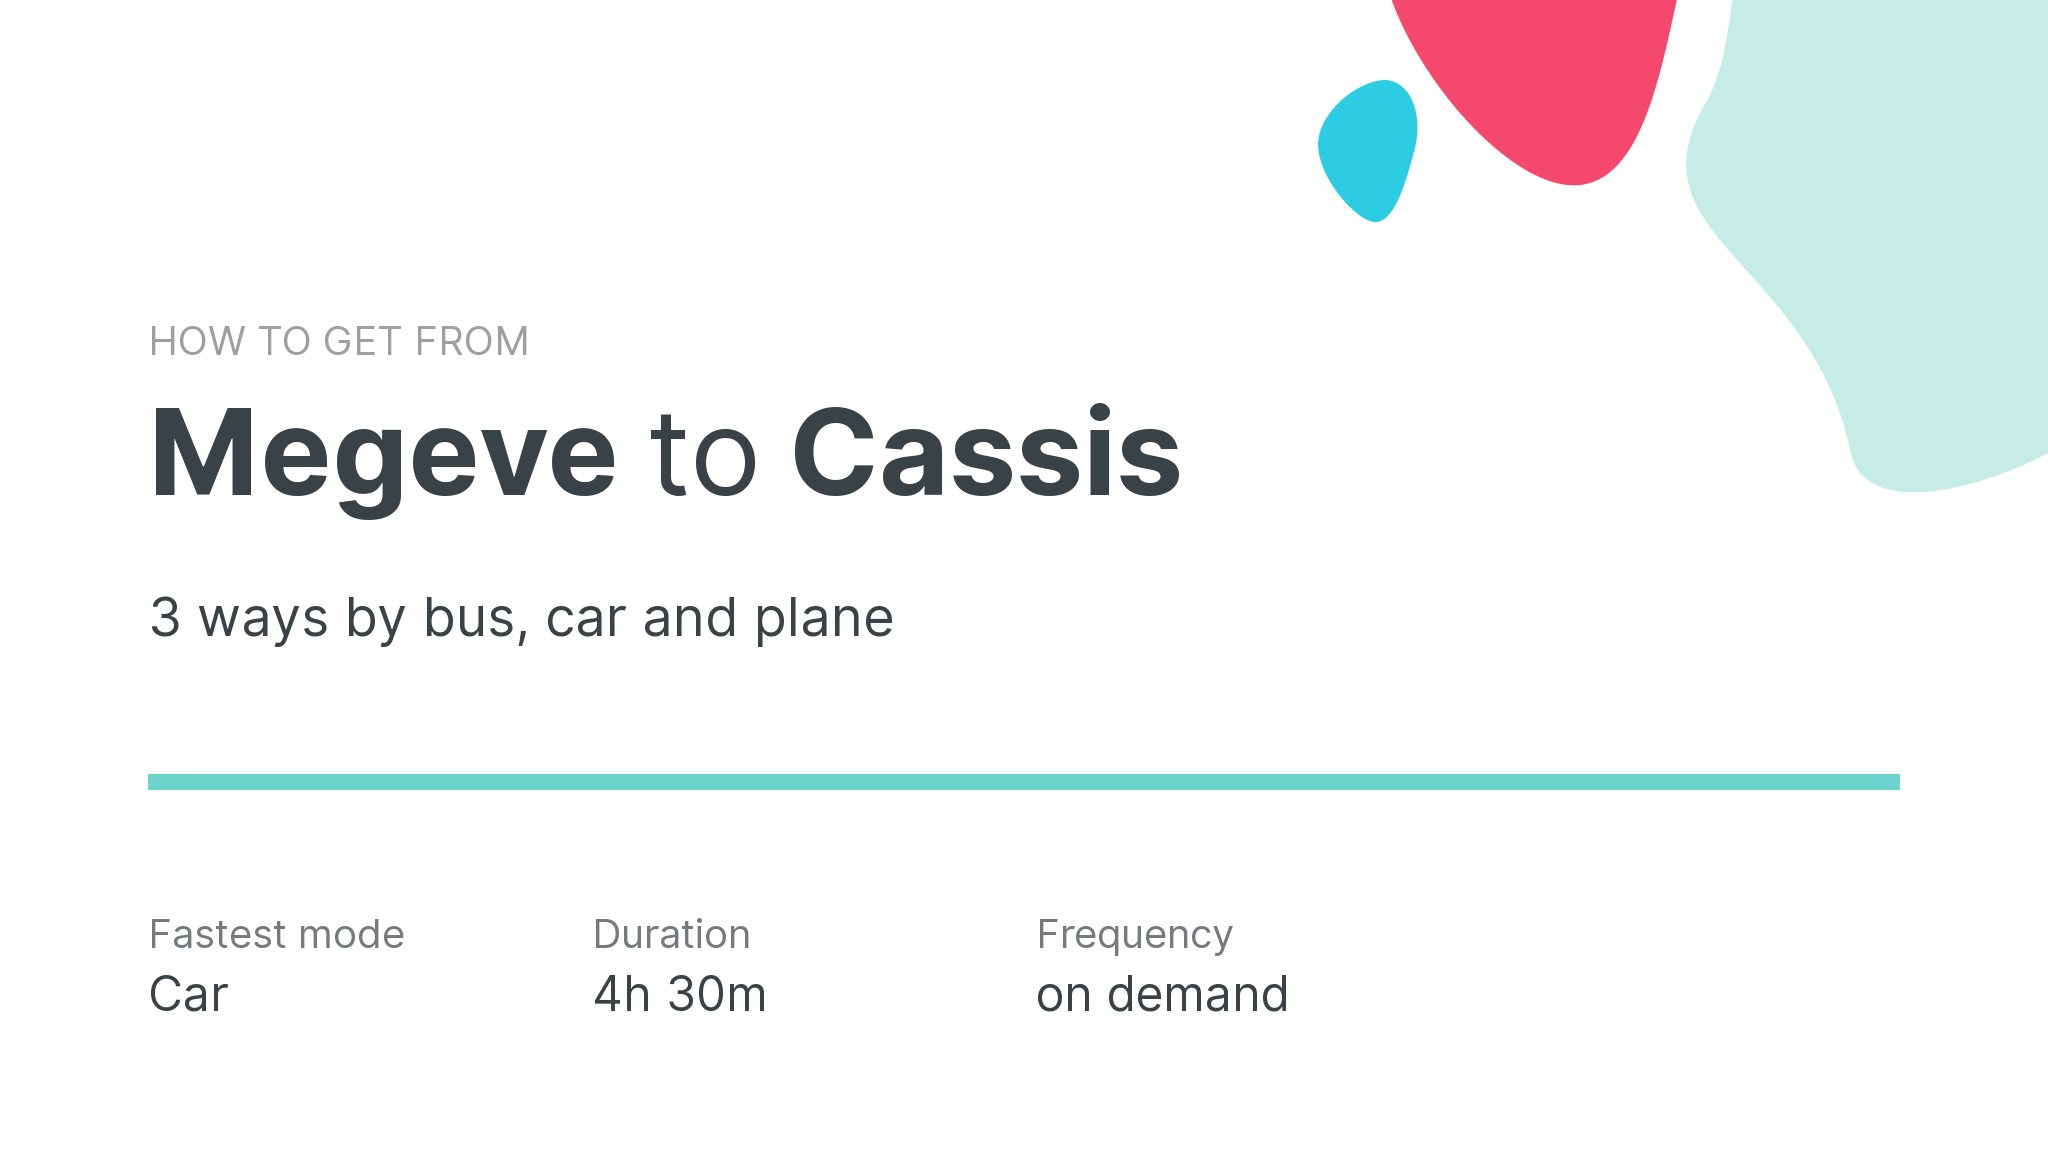 How do I get from Megeve to Cassis